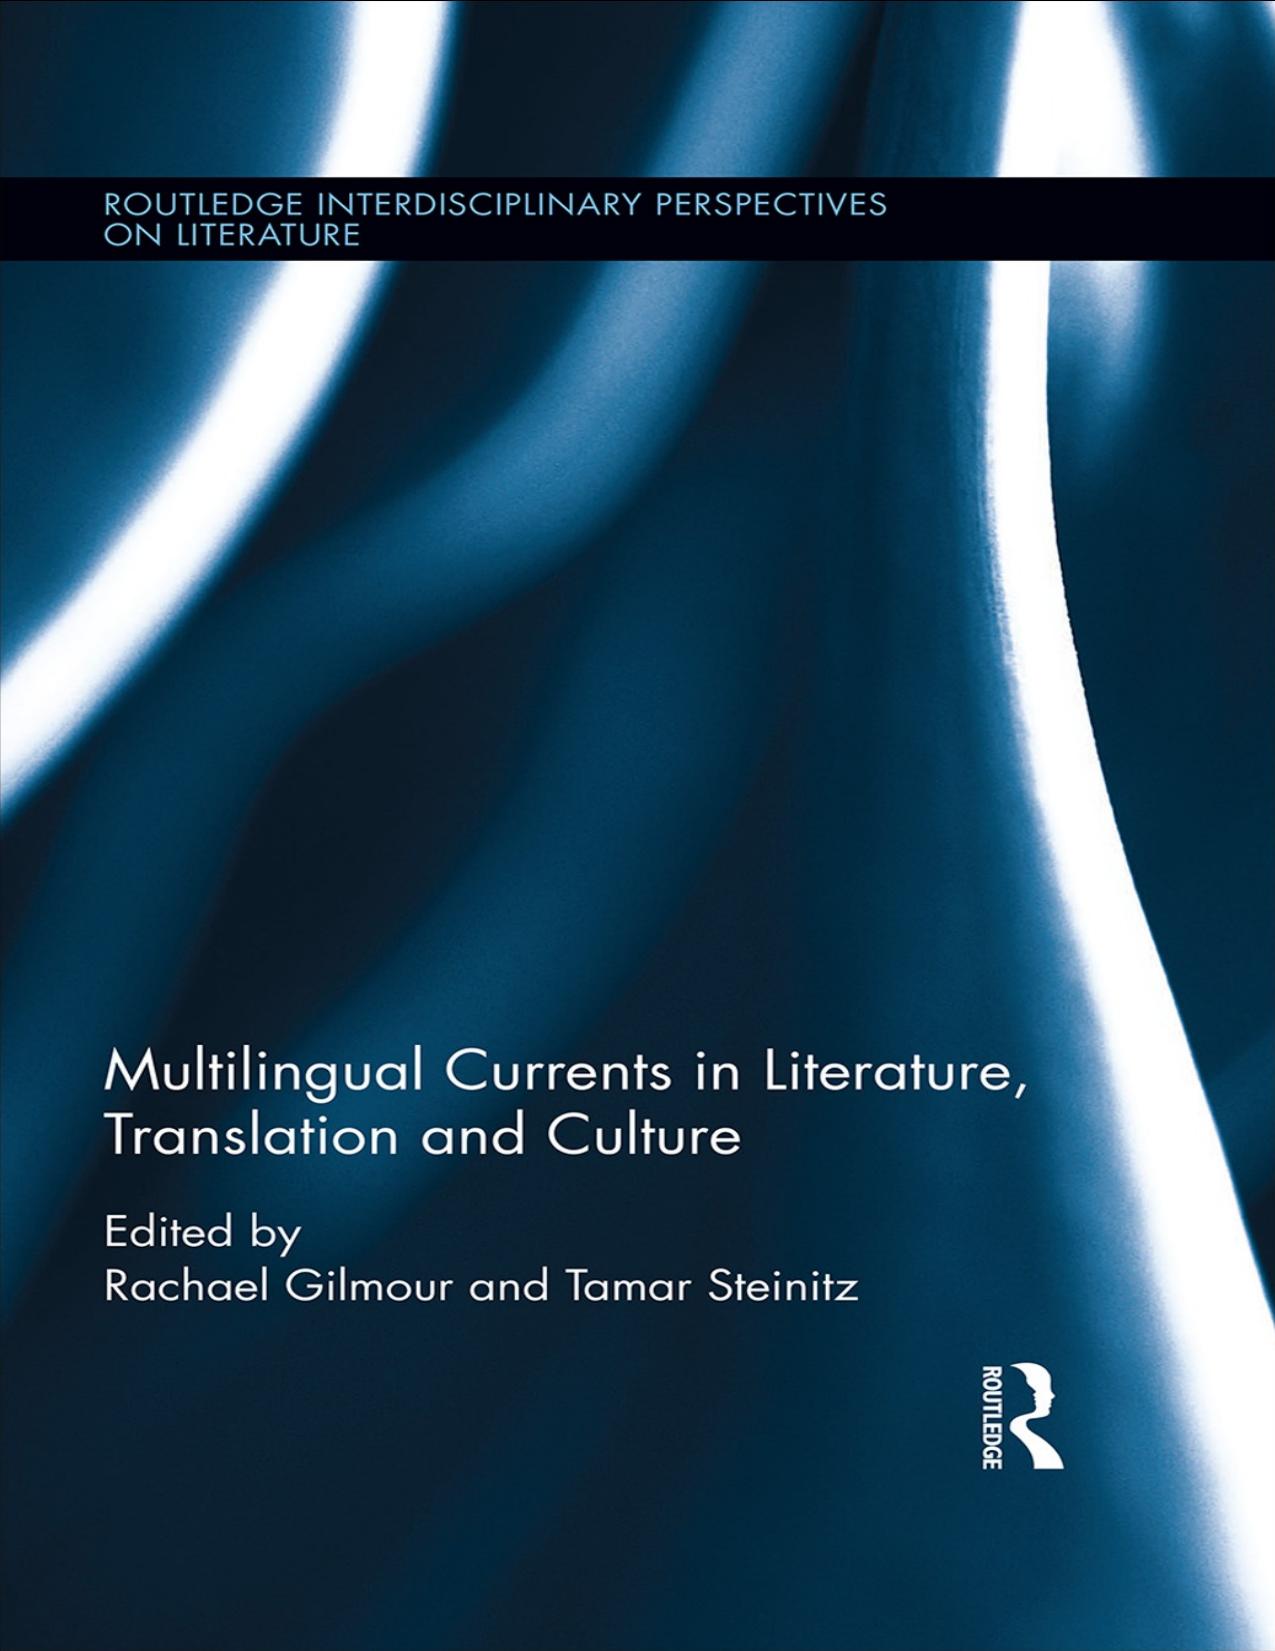 Multilingual Currents in Literature, Translation and Culture - PDFDrive.com